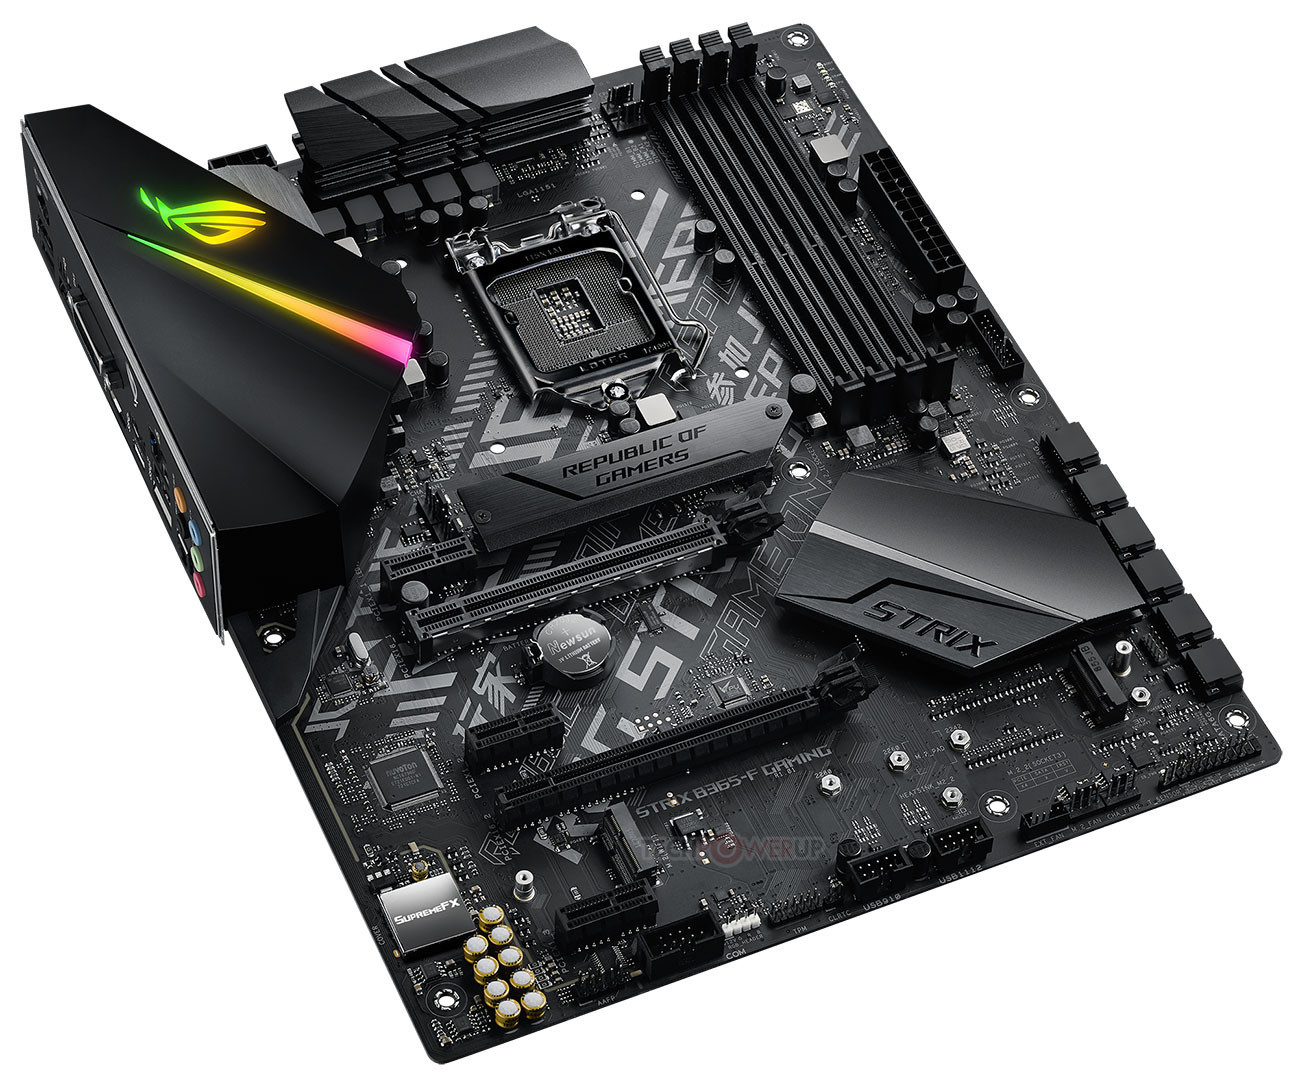 Asus Also Outs Rog Strix 65 F Gaming Motherboard Techpowerup Forums